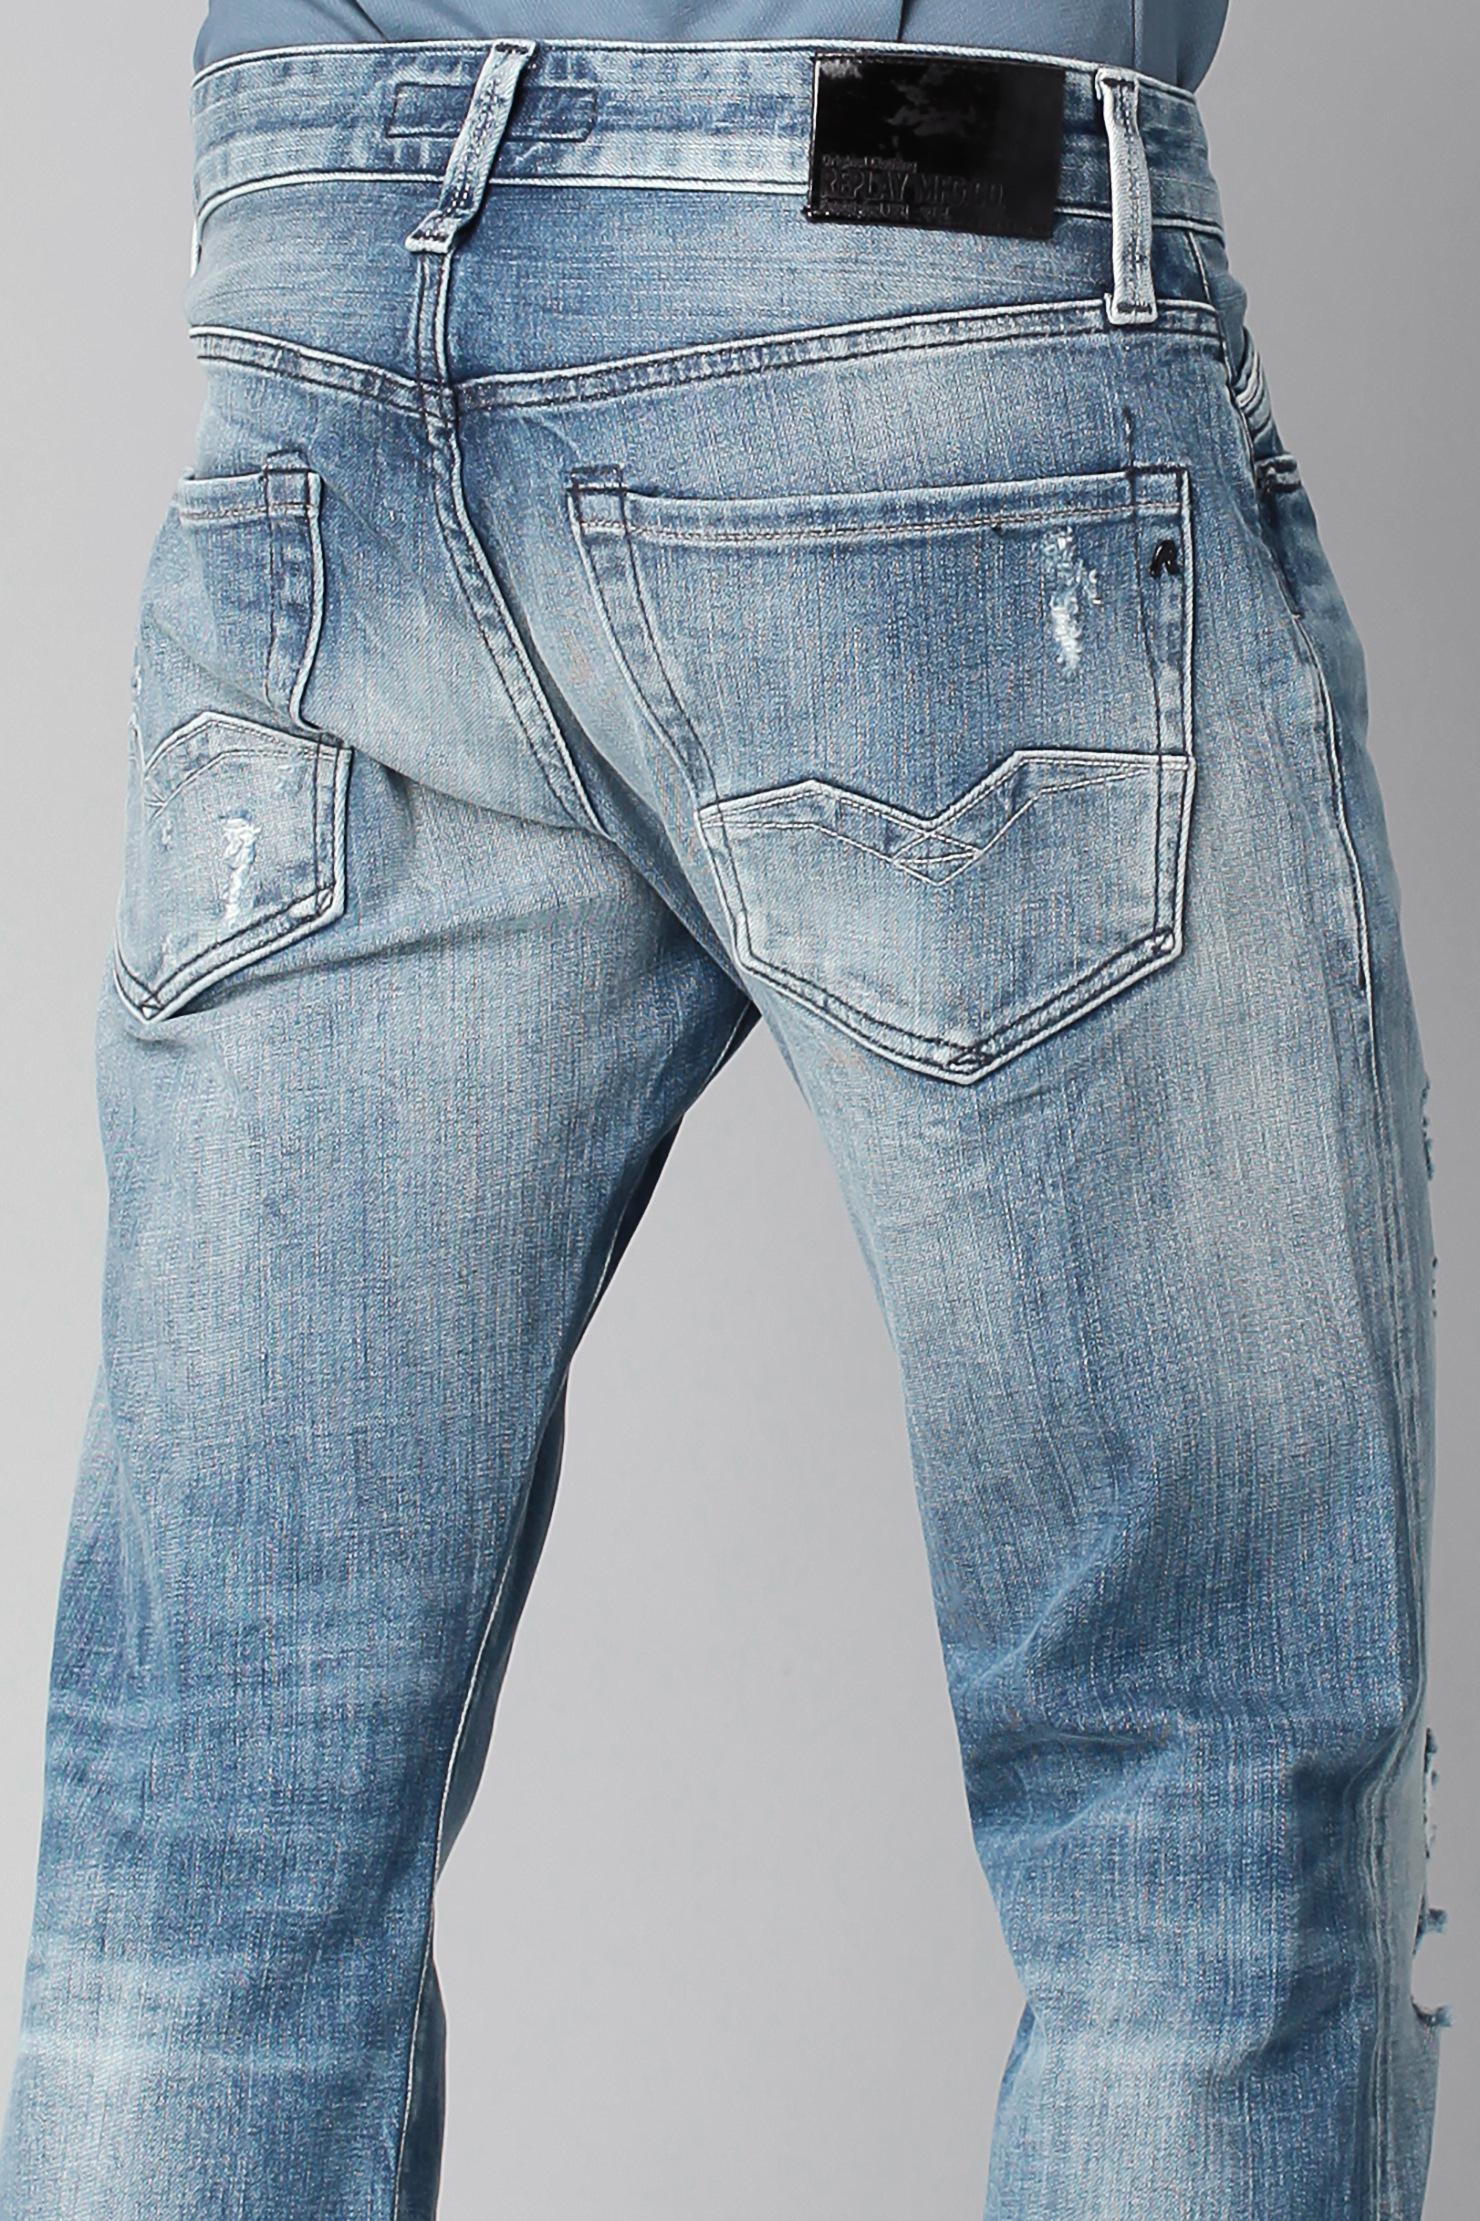 Lyst - Replay Jeans in Blue for Men